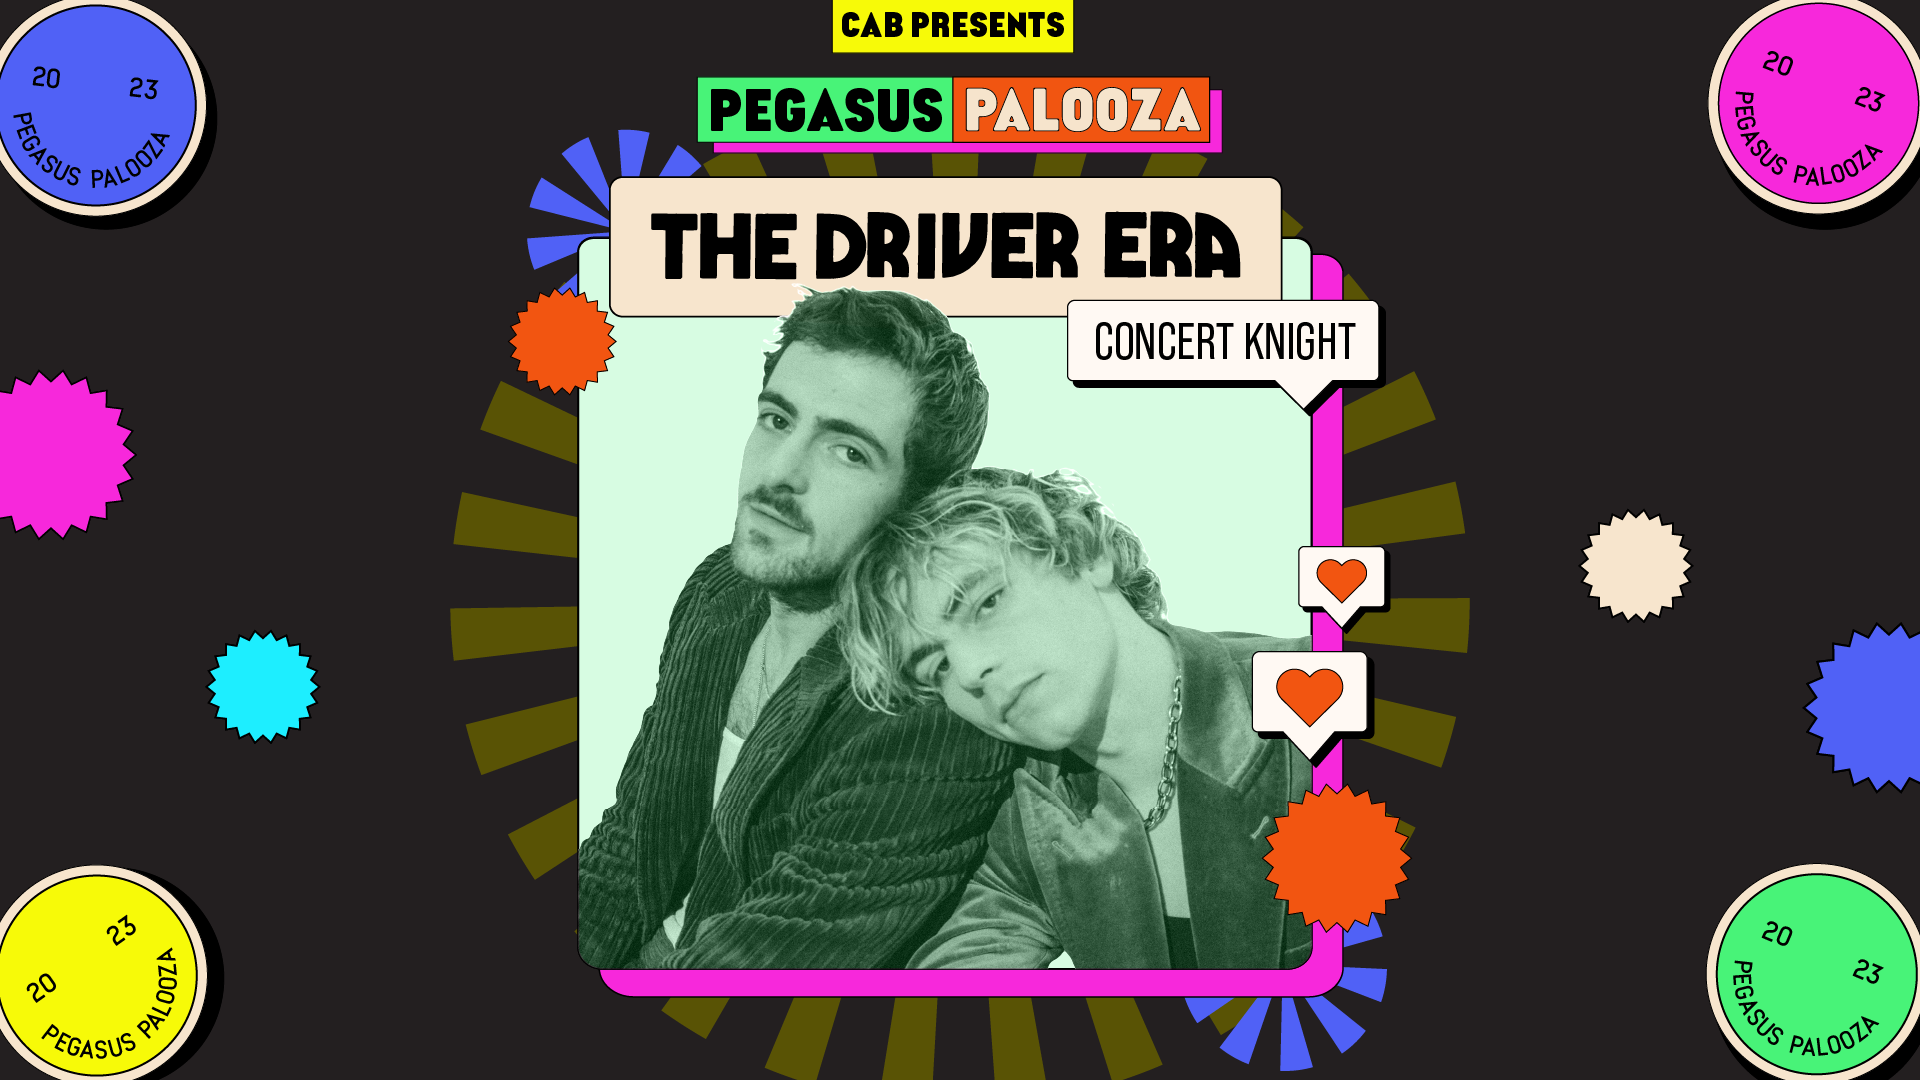 Illustration of The Driver Era signers in the middle with the following text: CAB presents; Pegasus Palooza; The Driver Era; Concert Knight